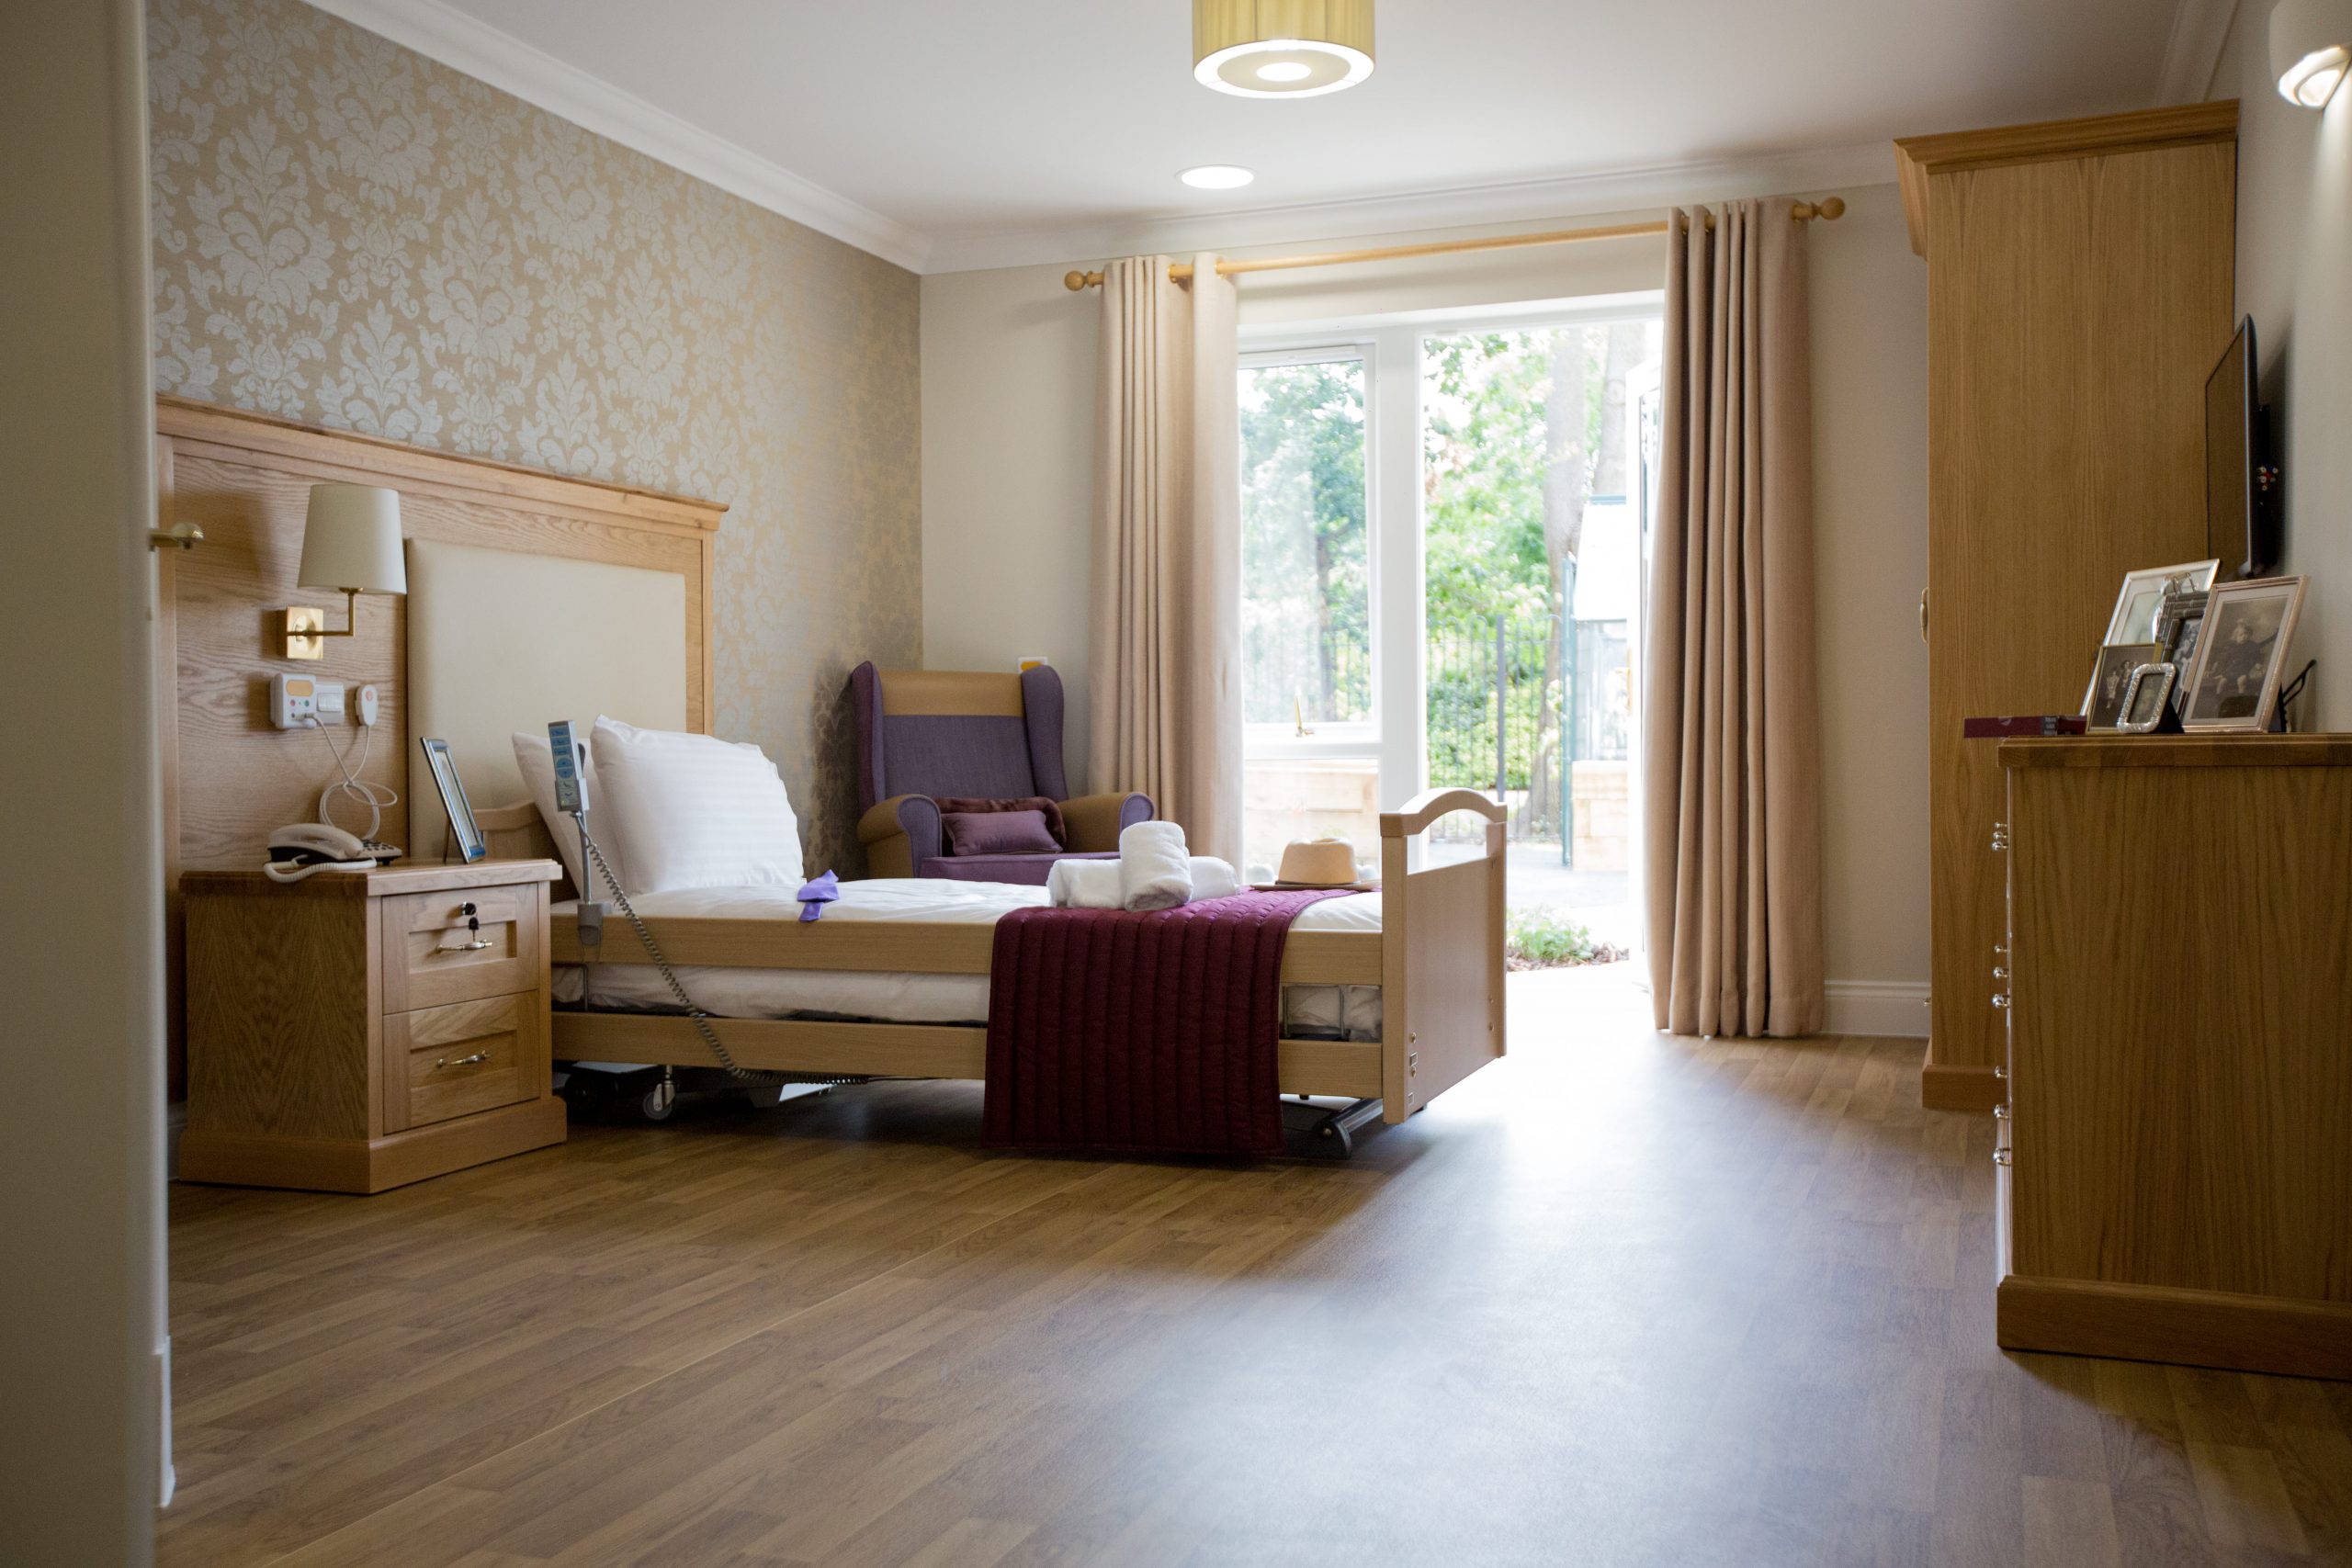 Cuffley Manor Care home in Potters bar Hertfordshire Bedroom Look